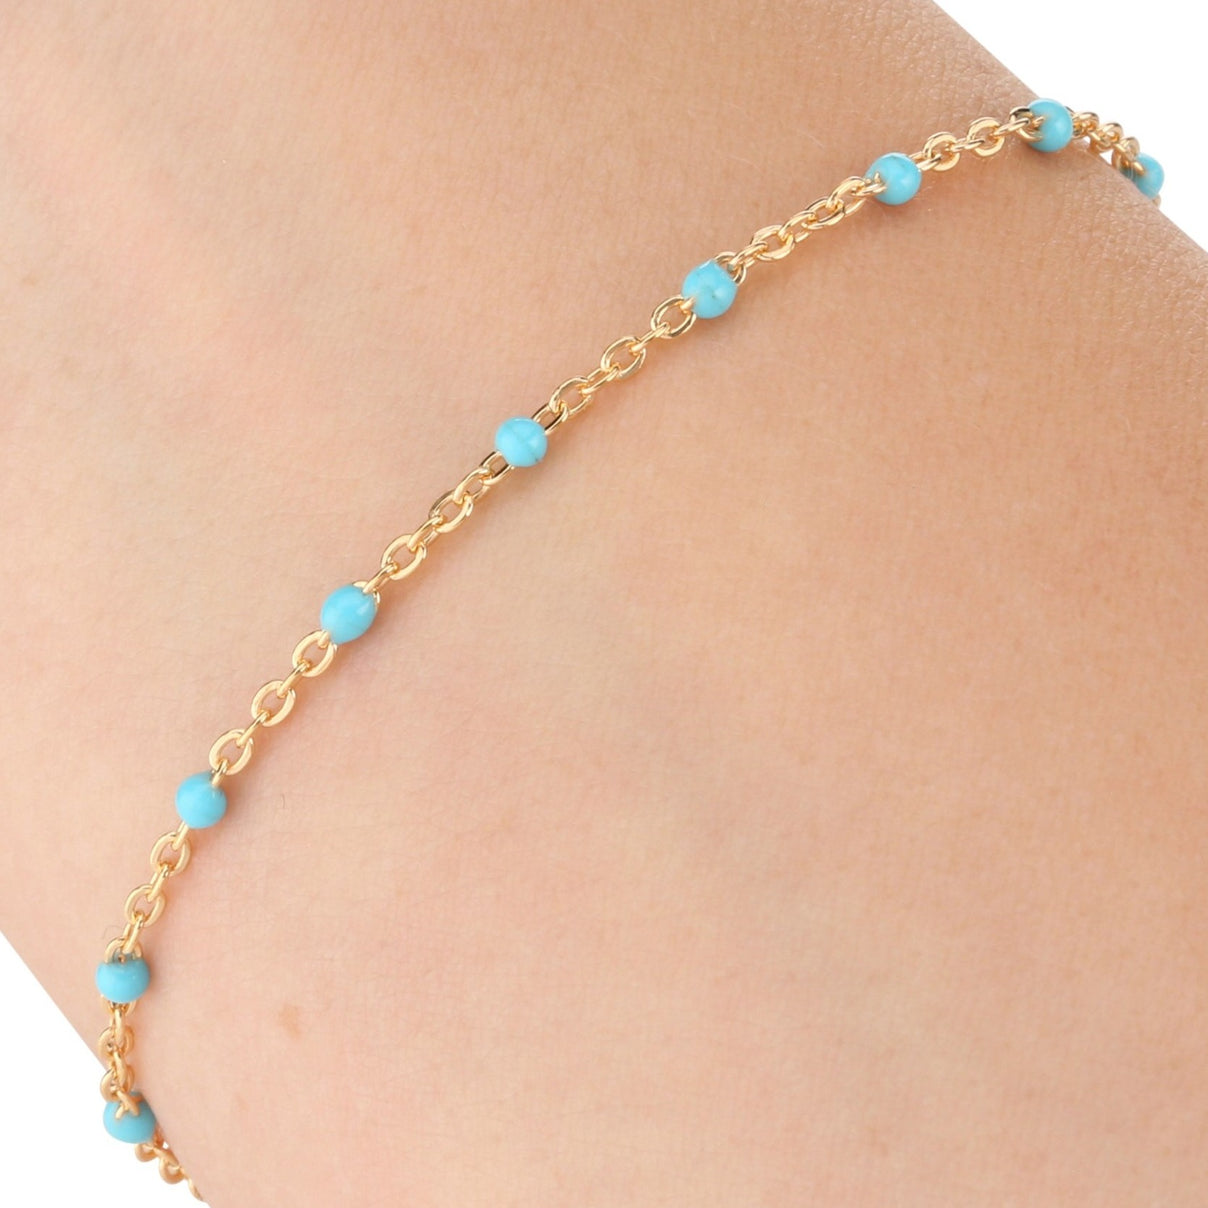 Enamel Blue Beads, 1.5MM, 14/20 Gold Fill, Chain for Permanent